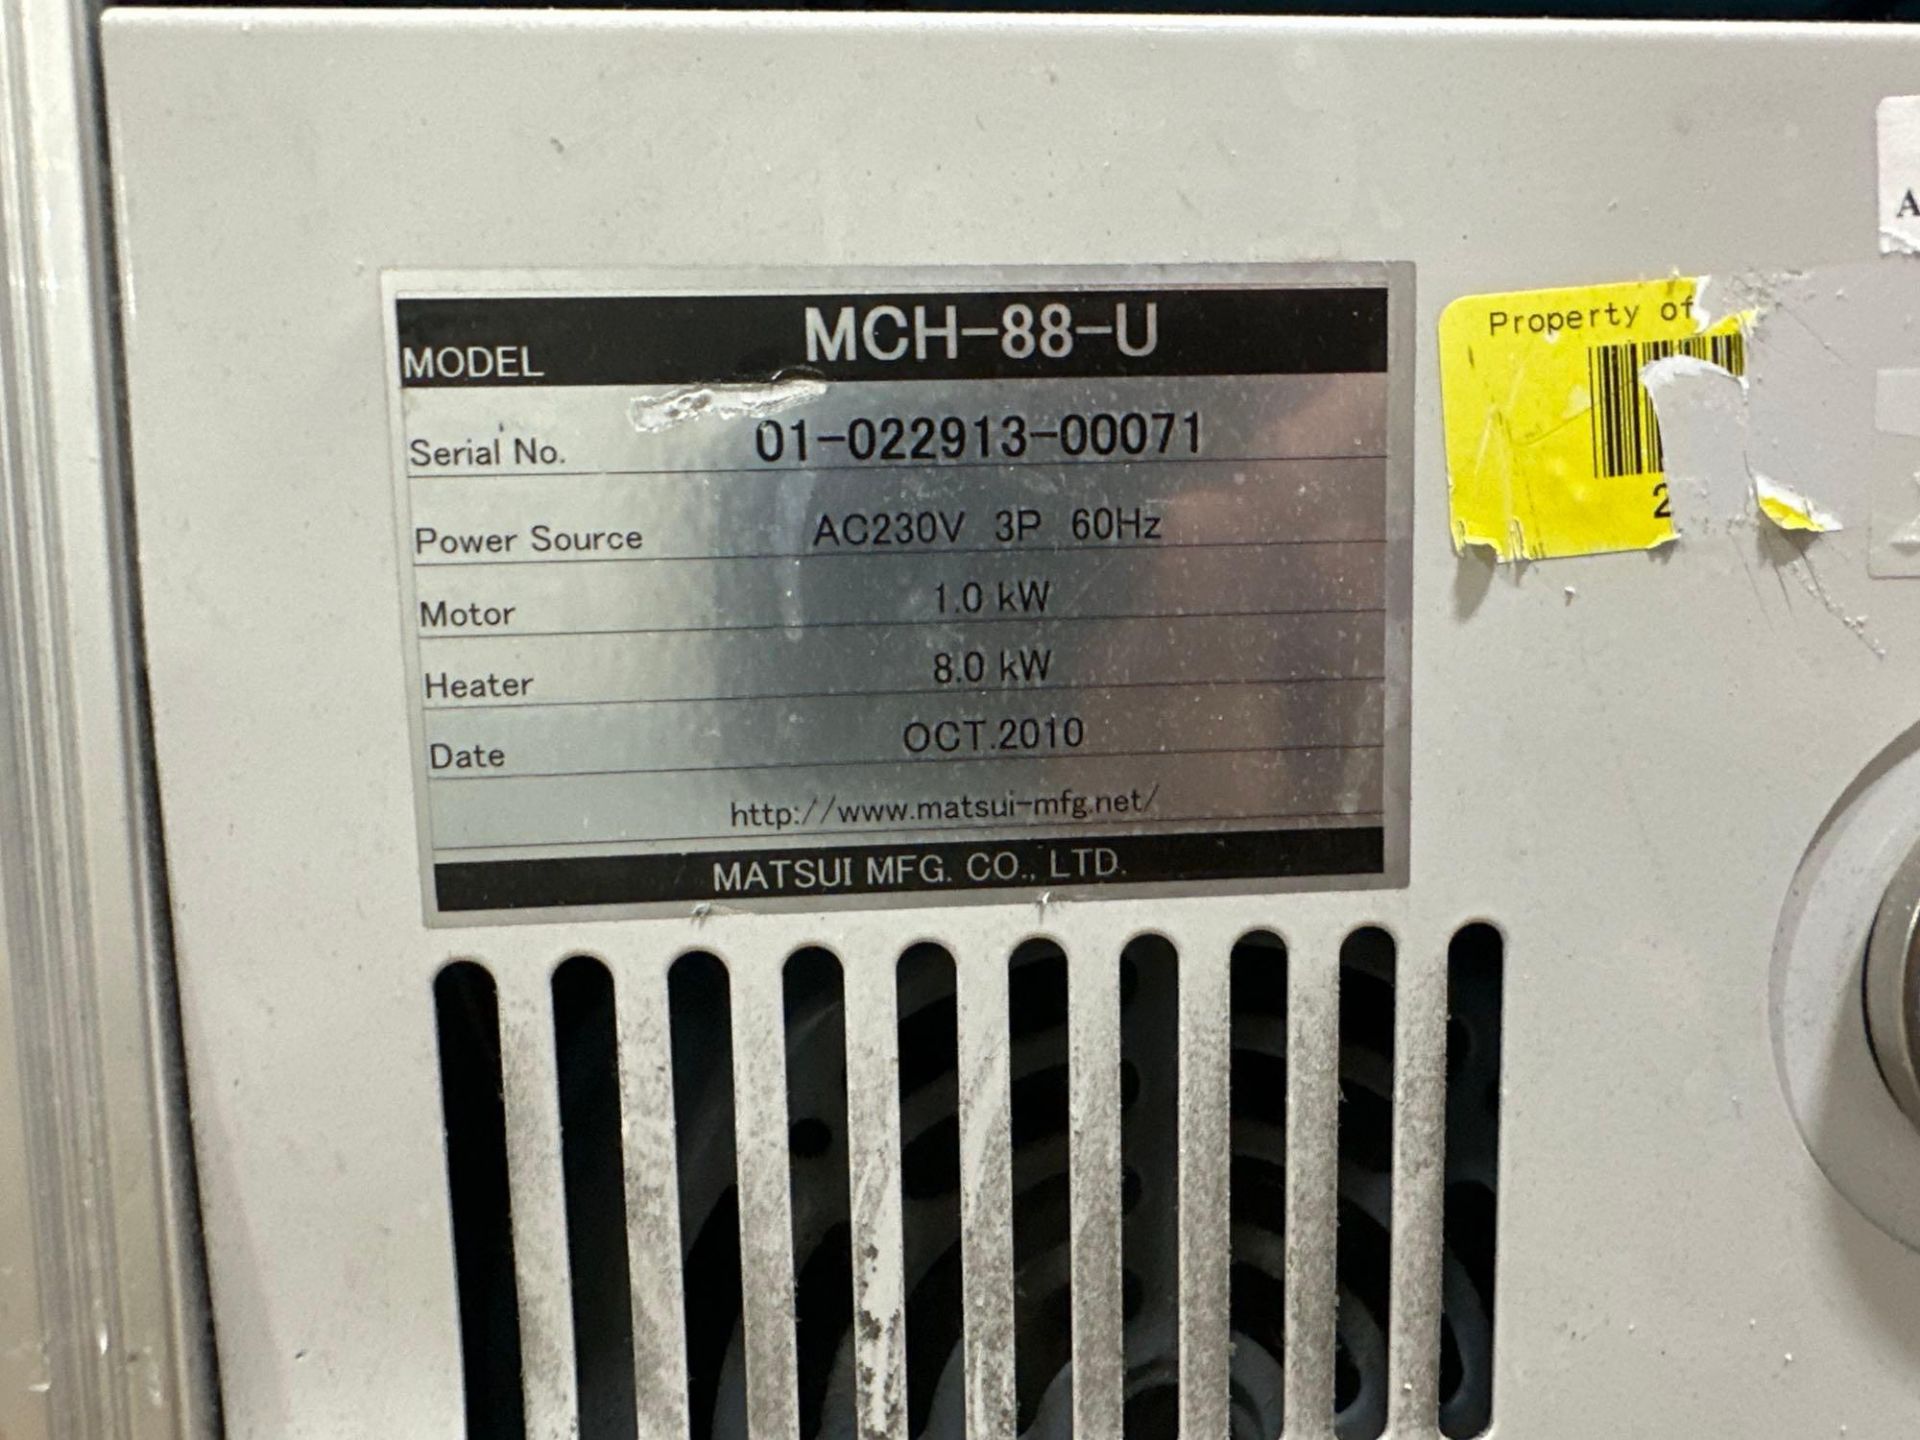 Matsui MCH-88-U Thermolator, 24gpm, 57psi, 248F, Equipped With:  Alarm Lamp and Buzzer - Image 5 of 5